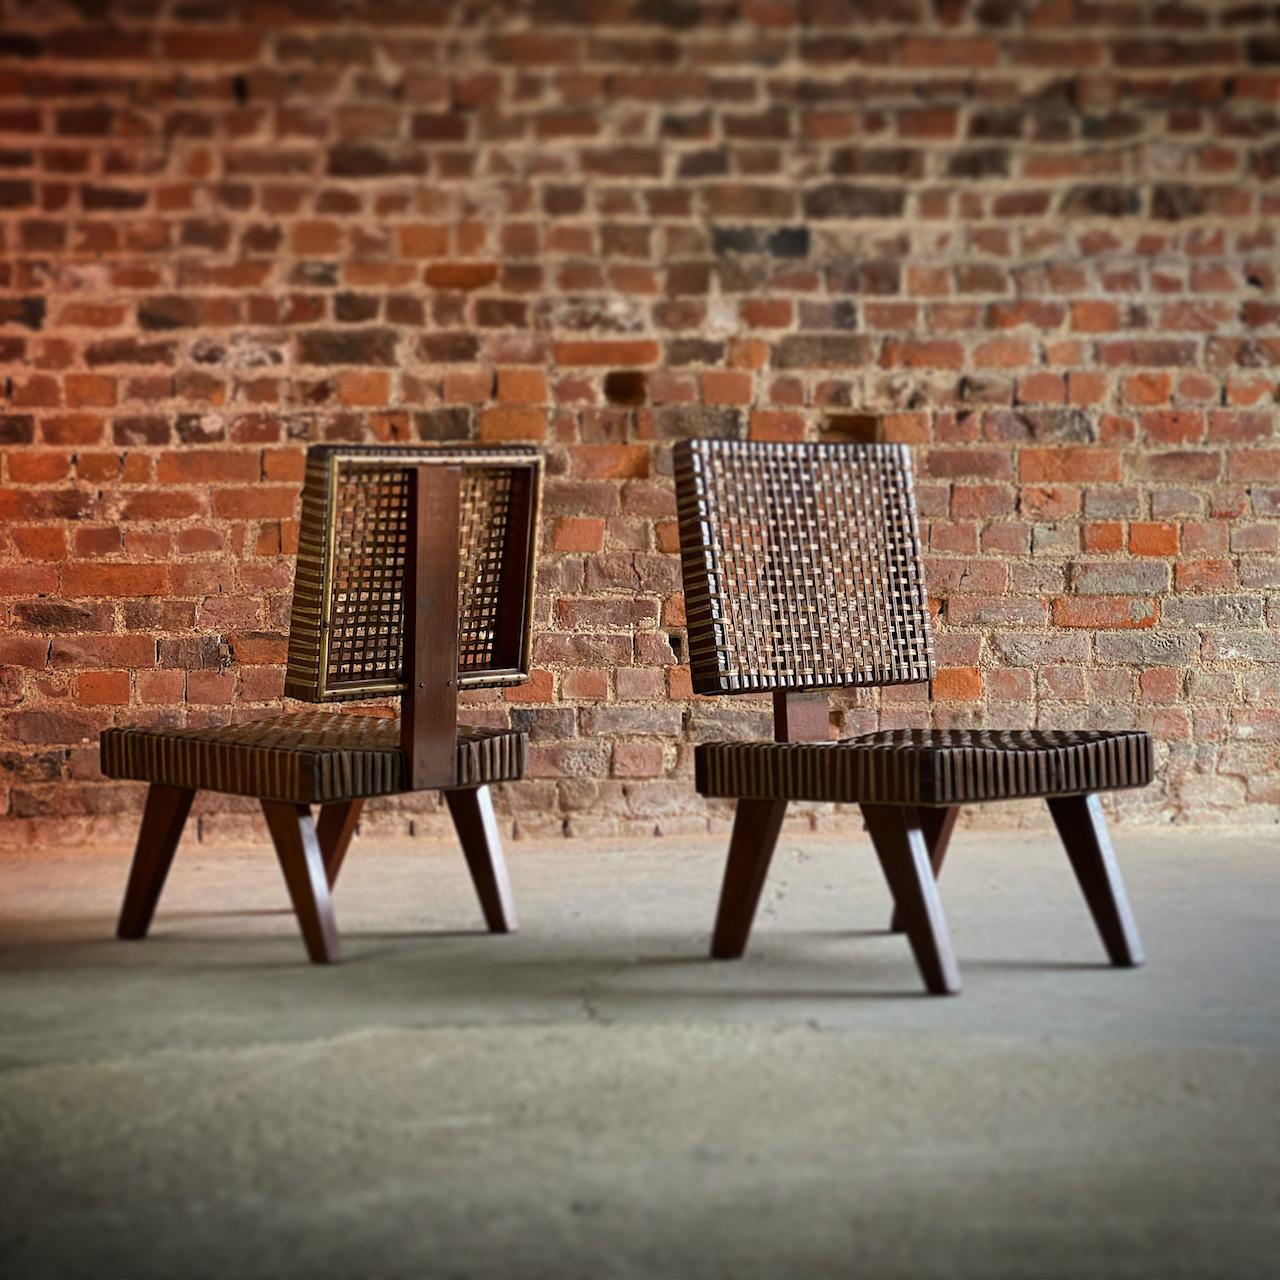 Mid-Century Modern Pierre Jeanneret Rare Lounge Chairs Chandigarh Circa 1955-56 For Sale